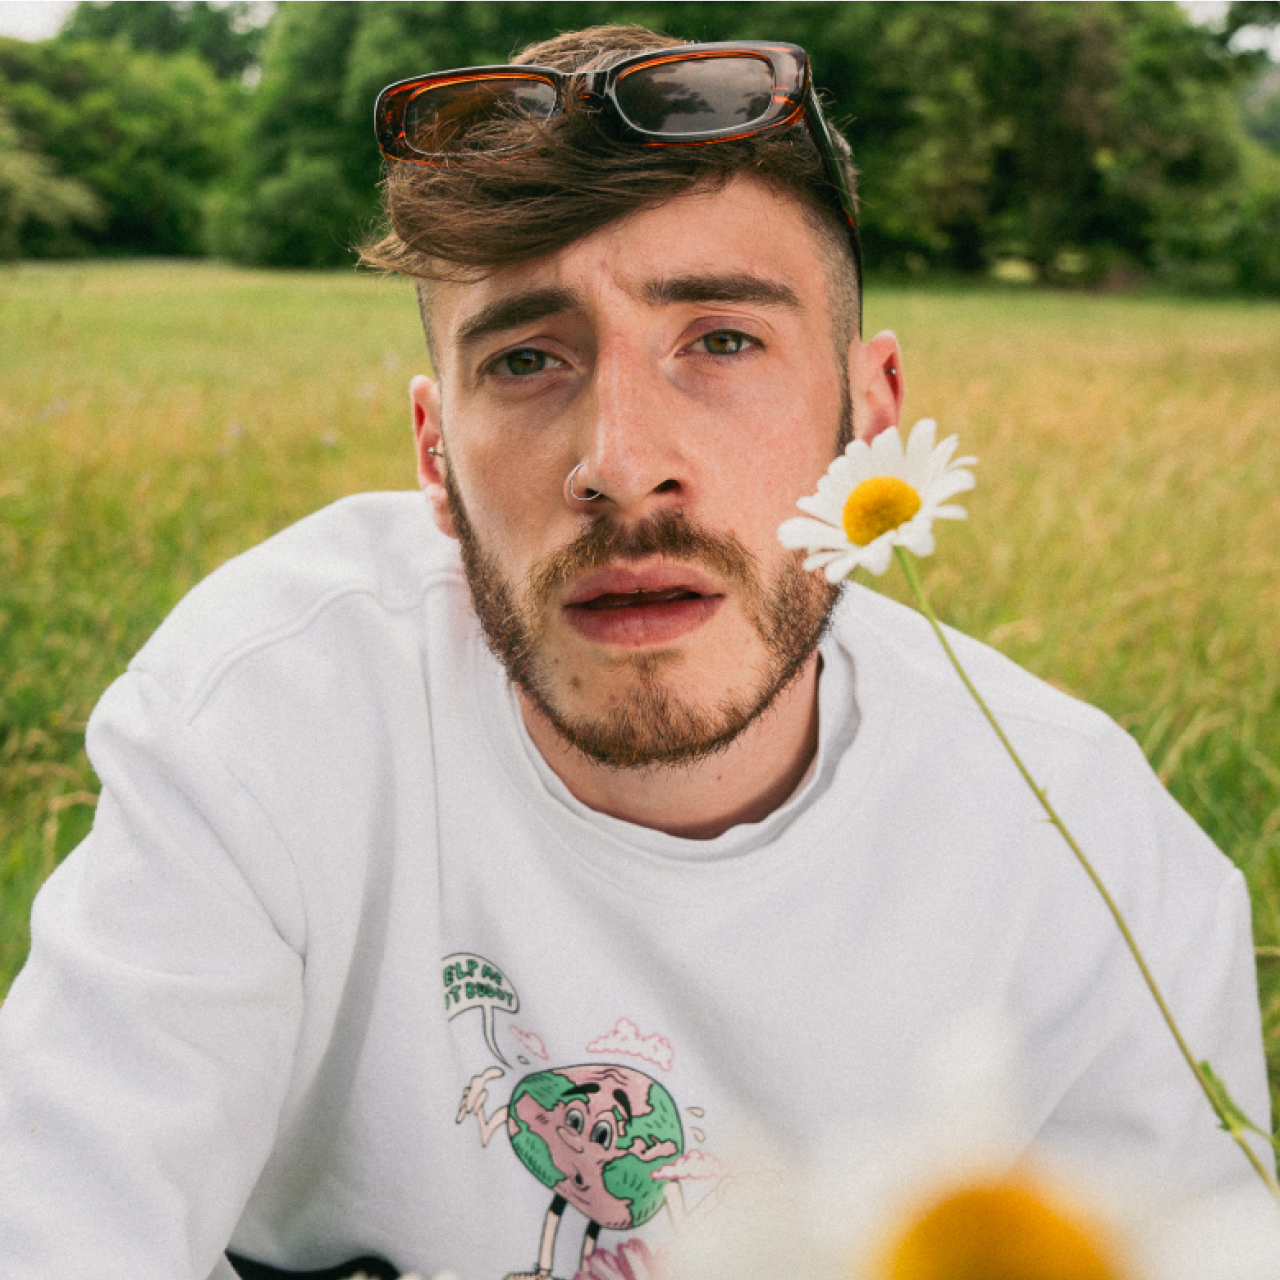 The singer 'Jarki Monno' in a field of daisies. 